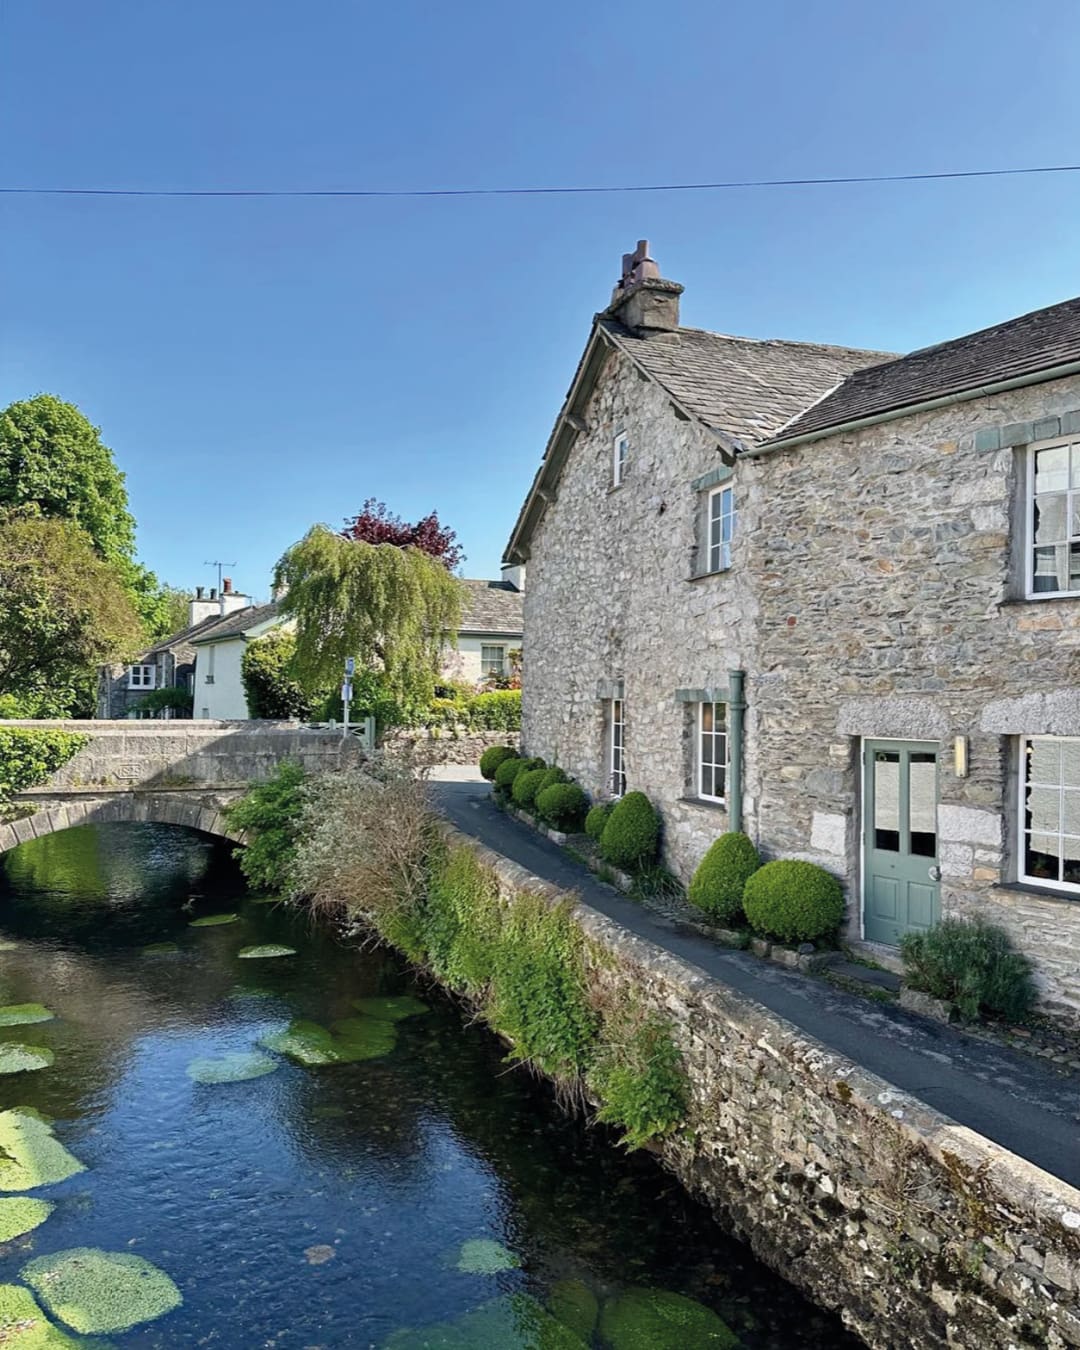 The best farm-to-table restaurants in the UK | Rogan and Co, along the River Eea in Cartmel, Cumbria.